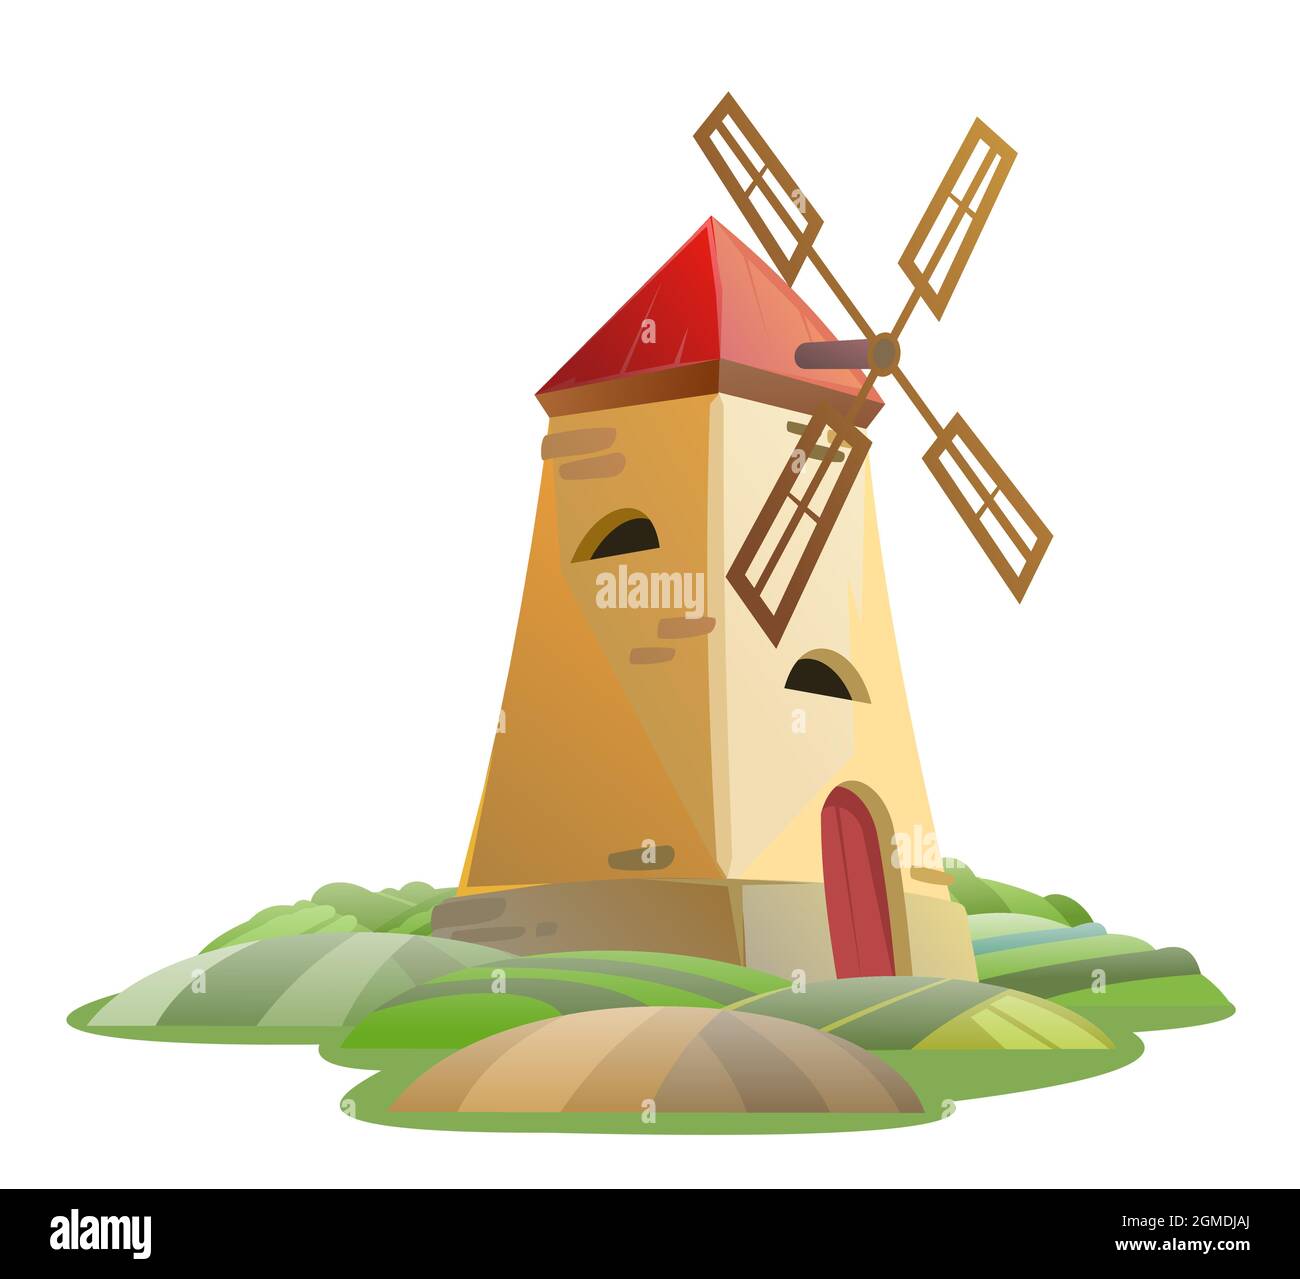 Old Windmill. Garden hills. Rural farm landscape. Cute funny cartoon design illustration. Isolated on white background. Flat style. Vector. Stock Vector